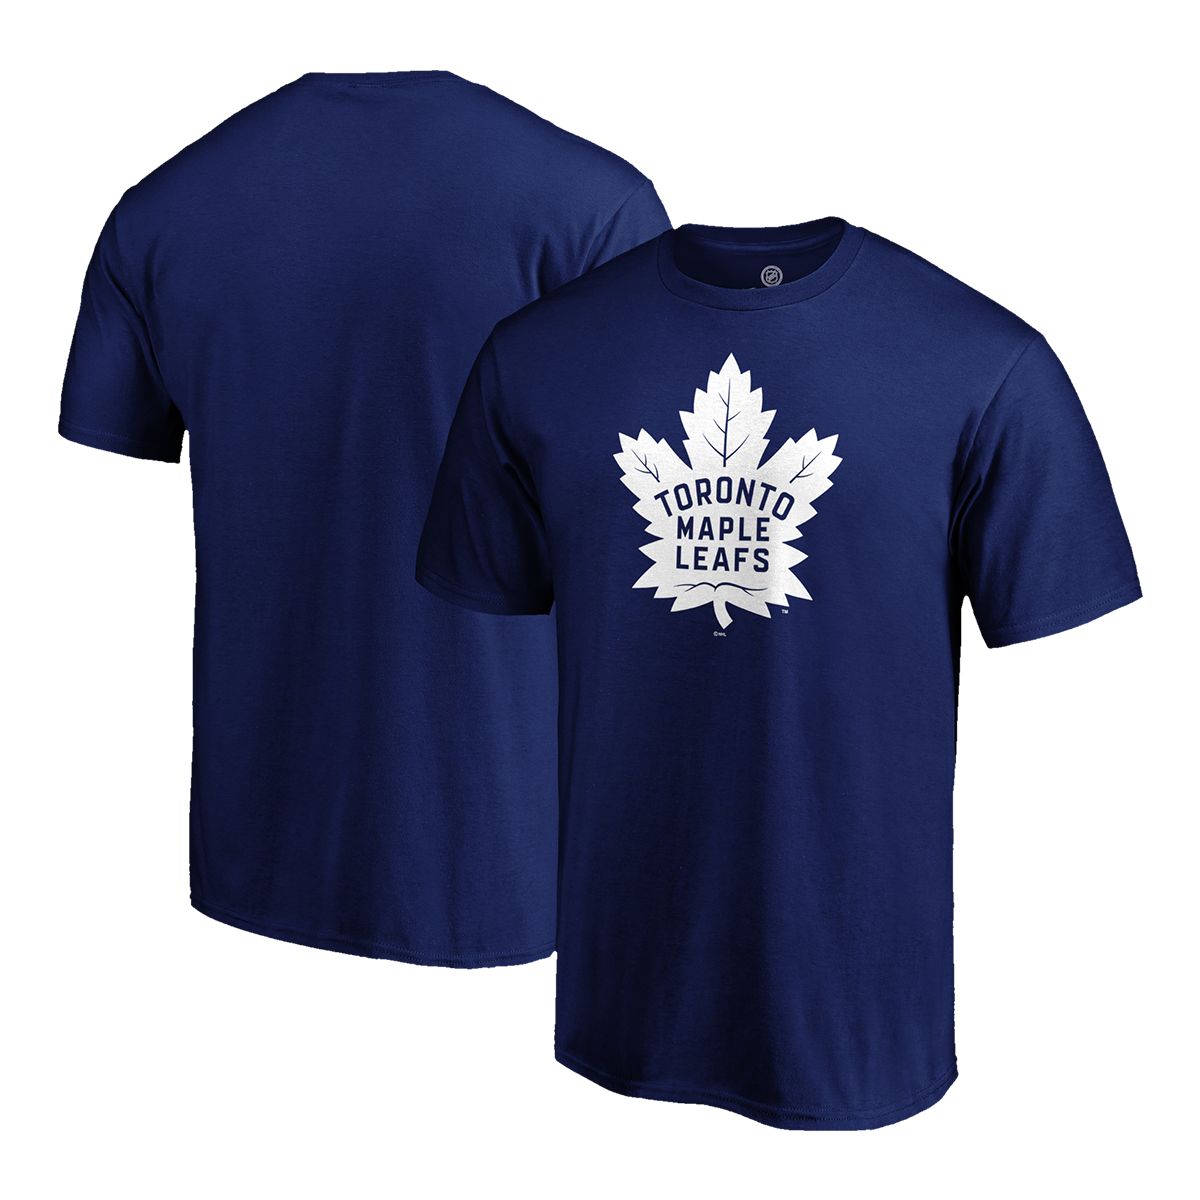 Toronto Maple Leafs Outerstuff Girls' Infant Fashion Jersey